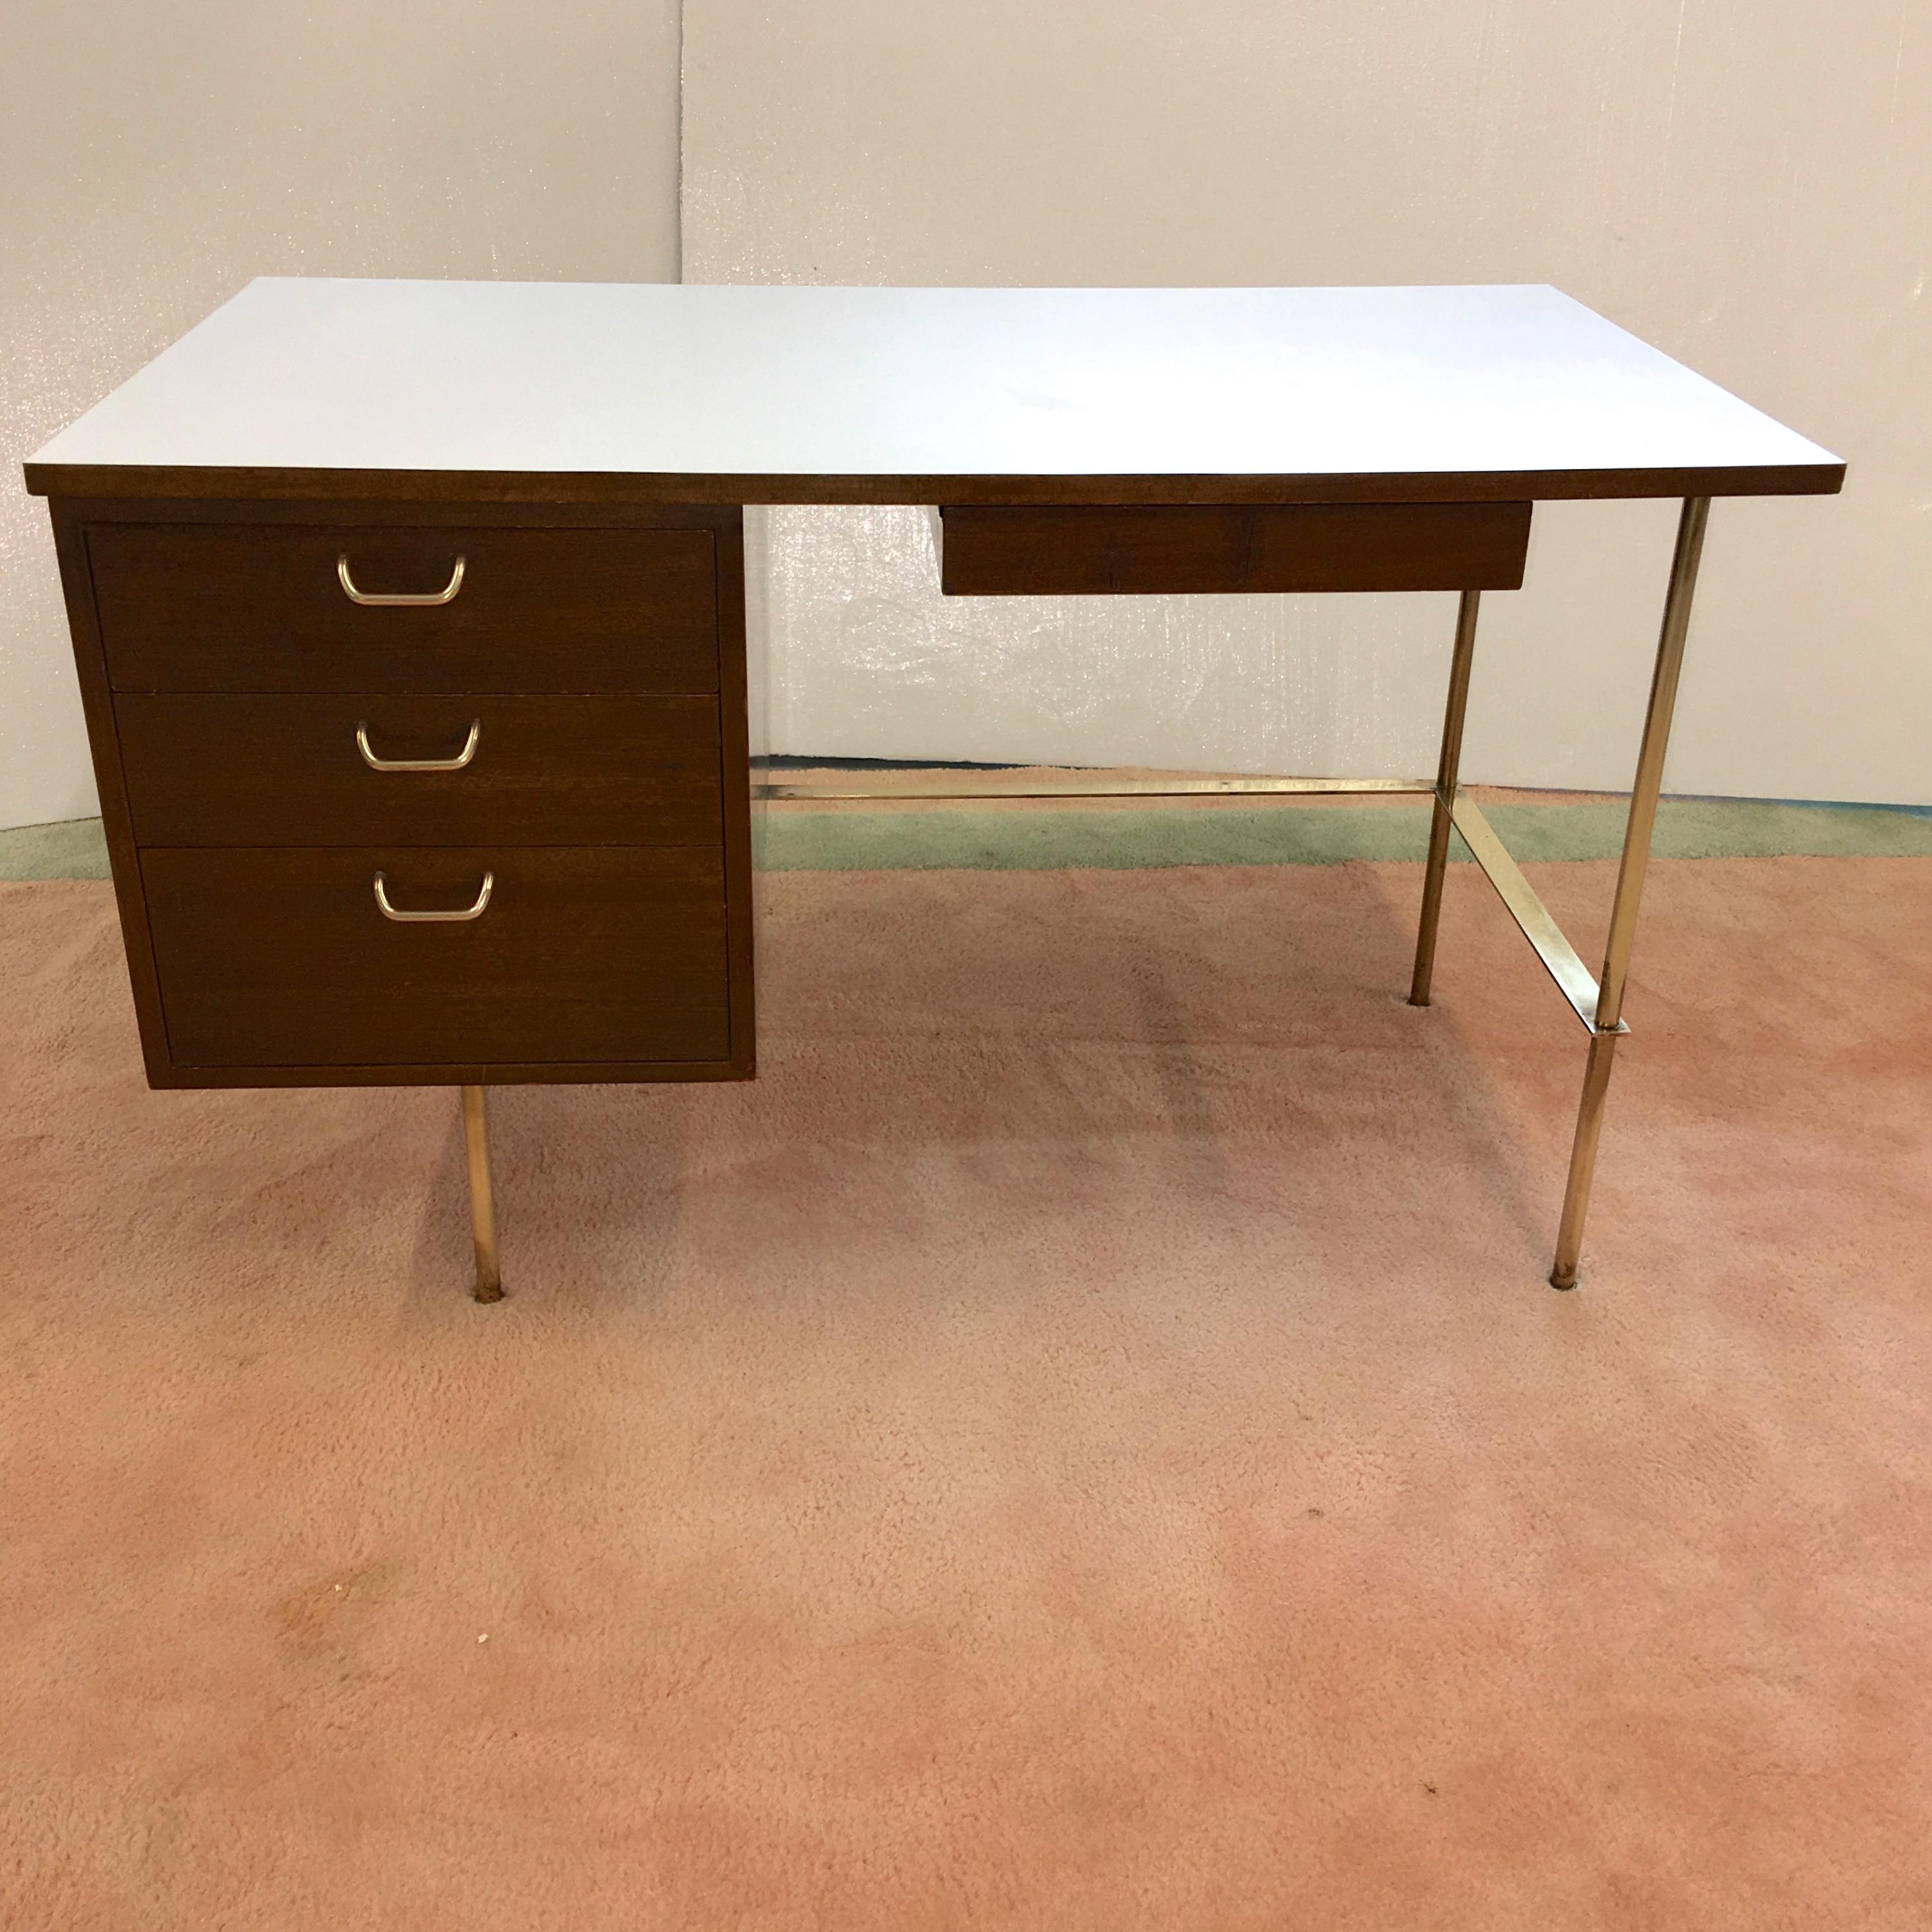 Harvey Probber mahogany writing desk with white laminate top with solid brass tubular legs and solid brass flat bar stretchers.

Left side oriented three drawer case with original solid brass handles. Drawer bottoms also white laminate. 

Harvey